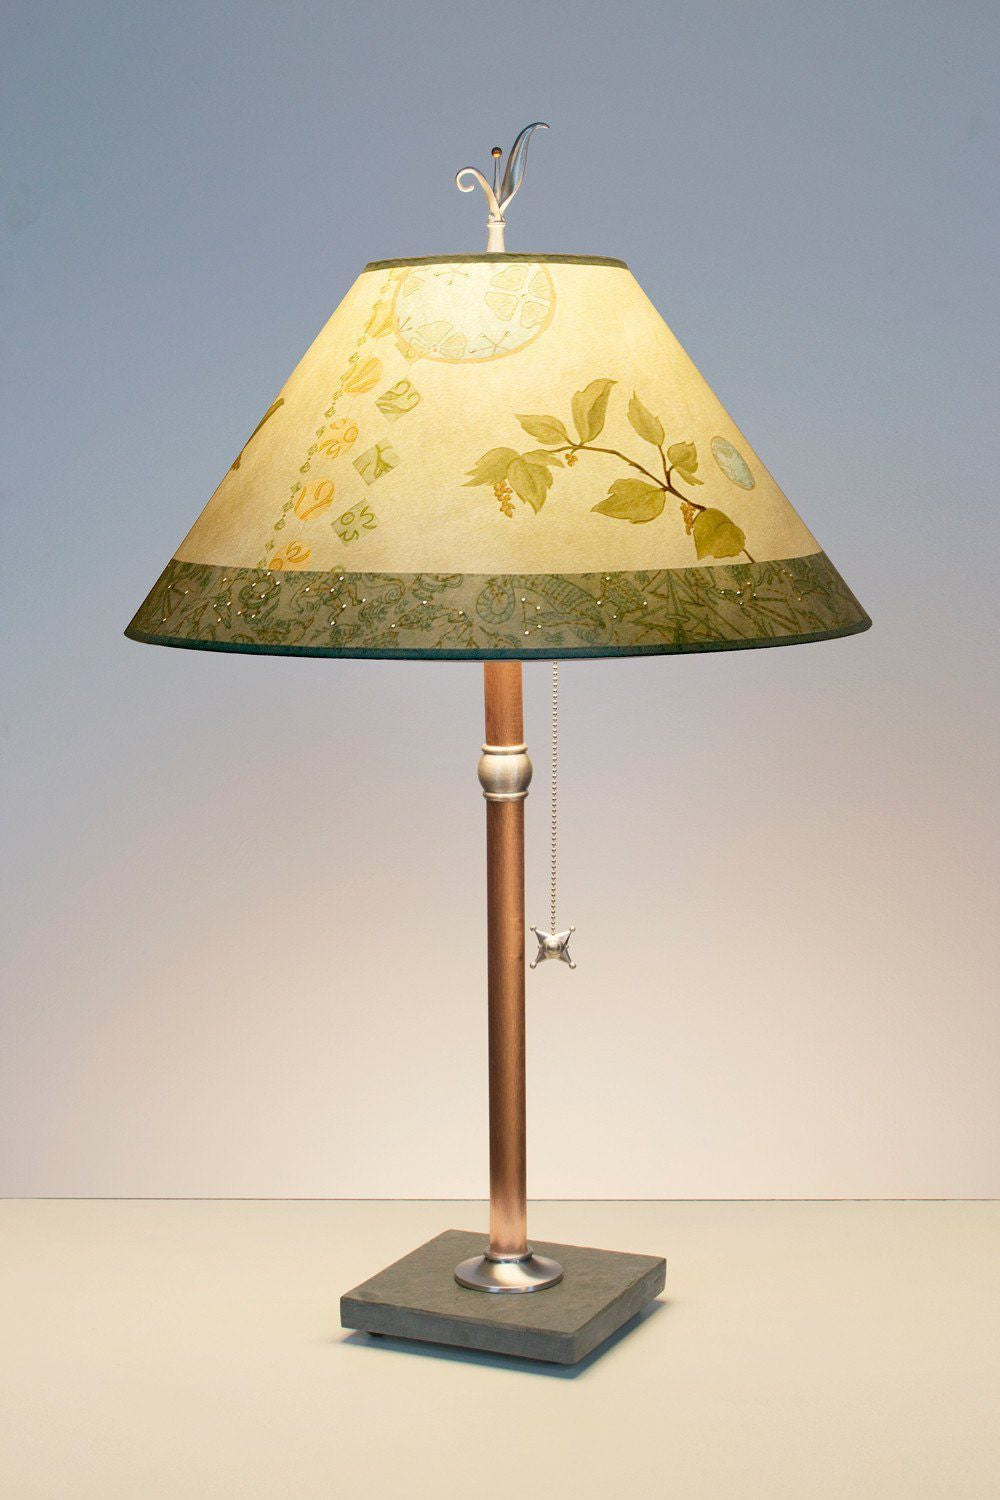 Janna Ugone &amp; Co Table Lamps Copper Table Lamp with Large Conical Shade in Celestial Leaf